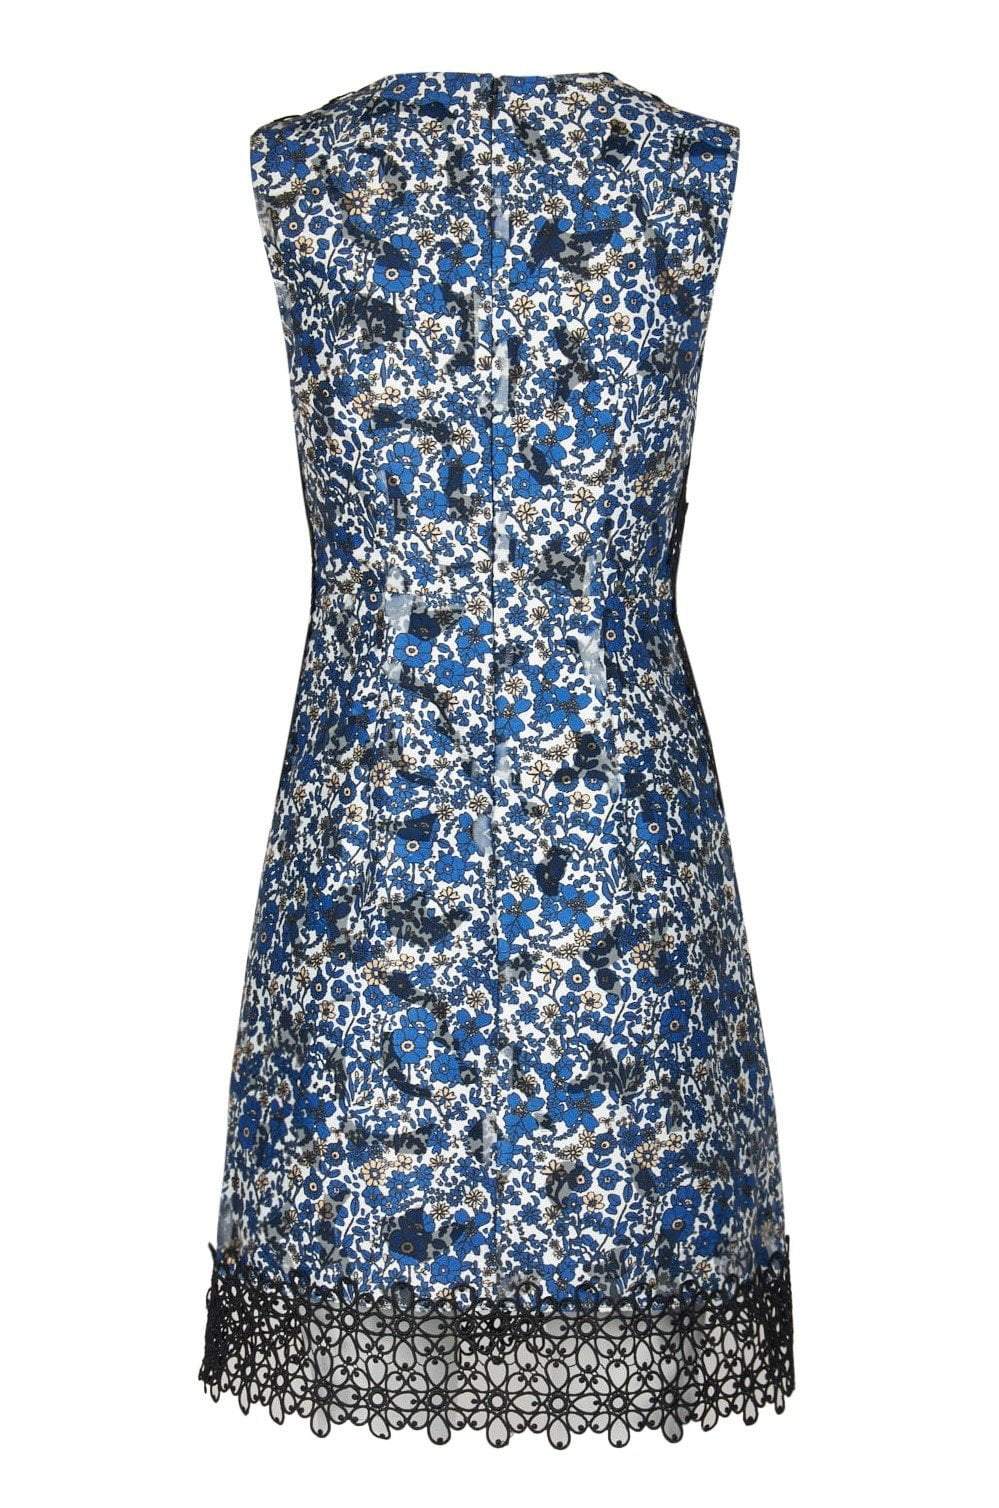 Elie Tahari - E40F9617 Floral Printed Crochet A-line Dress In Blue and Black